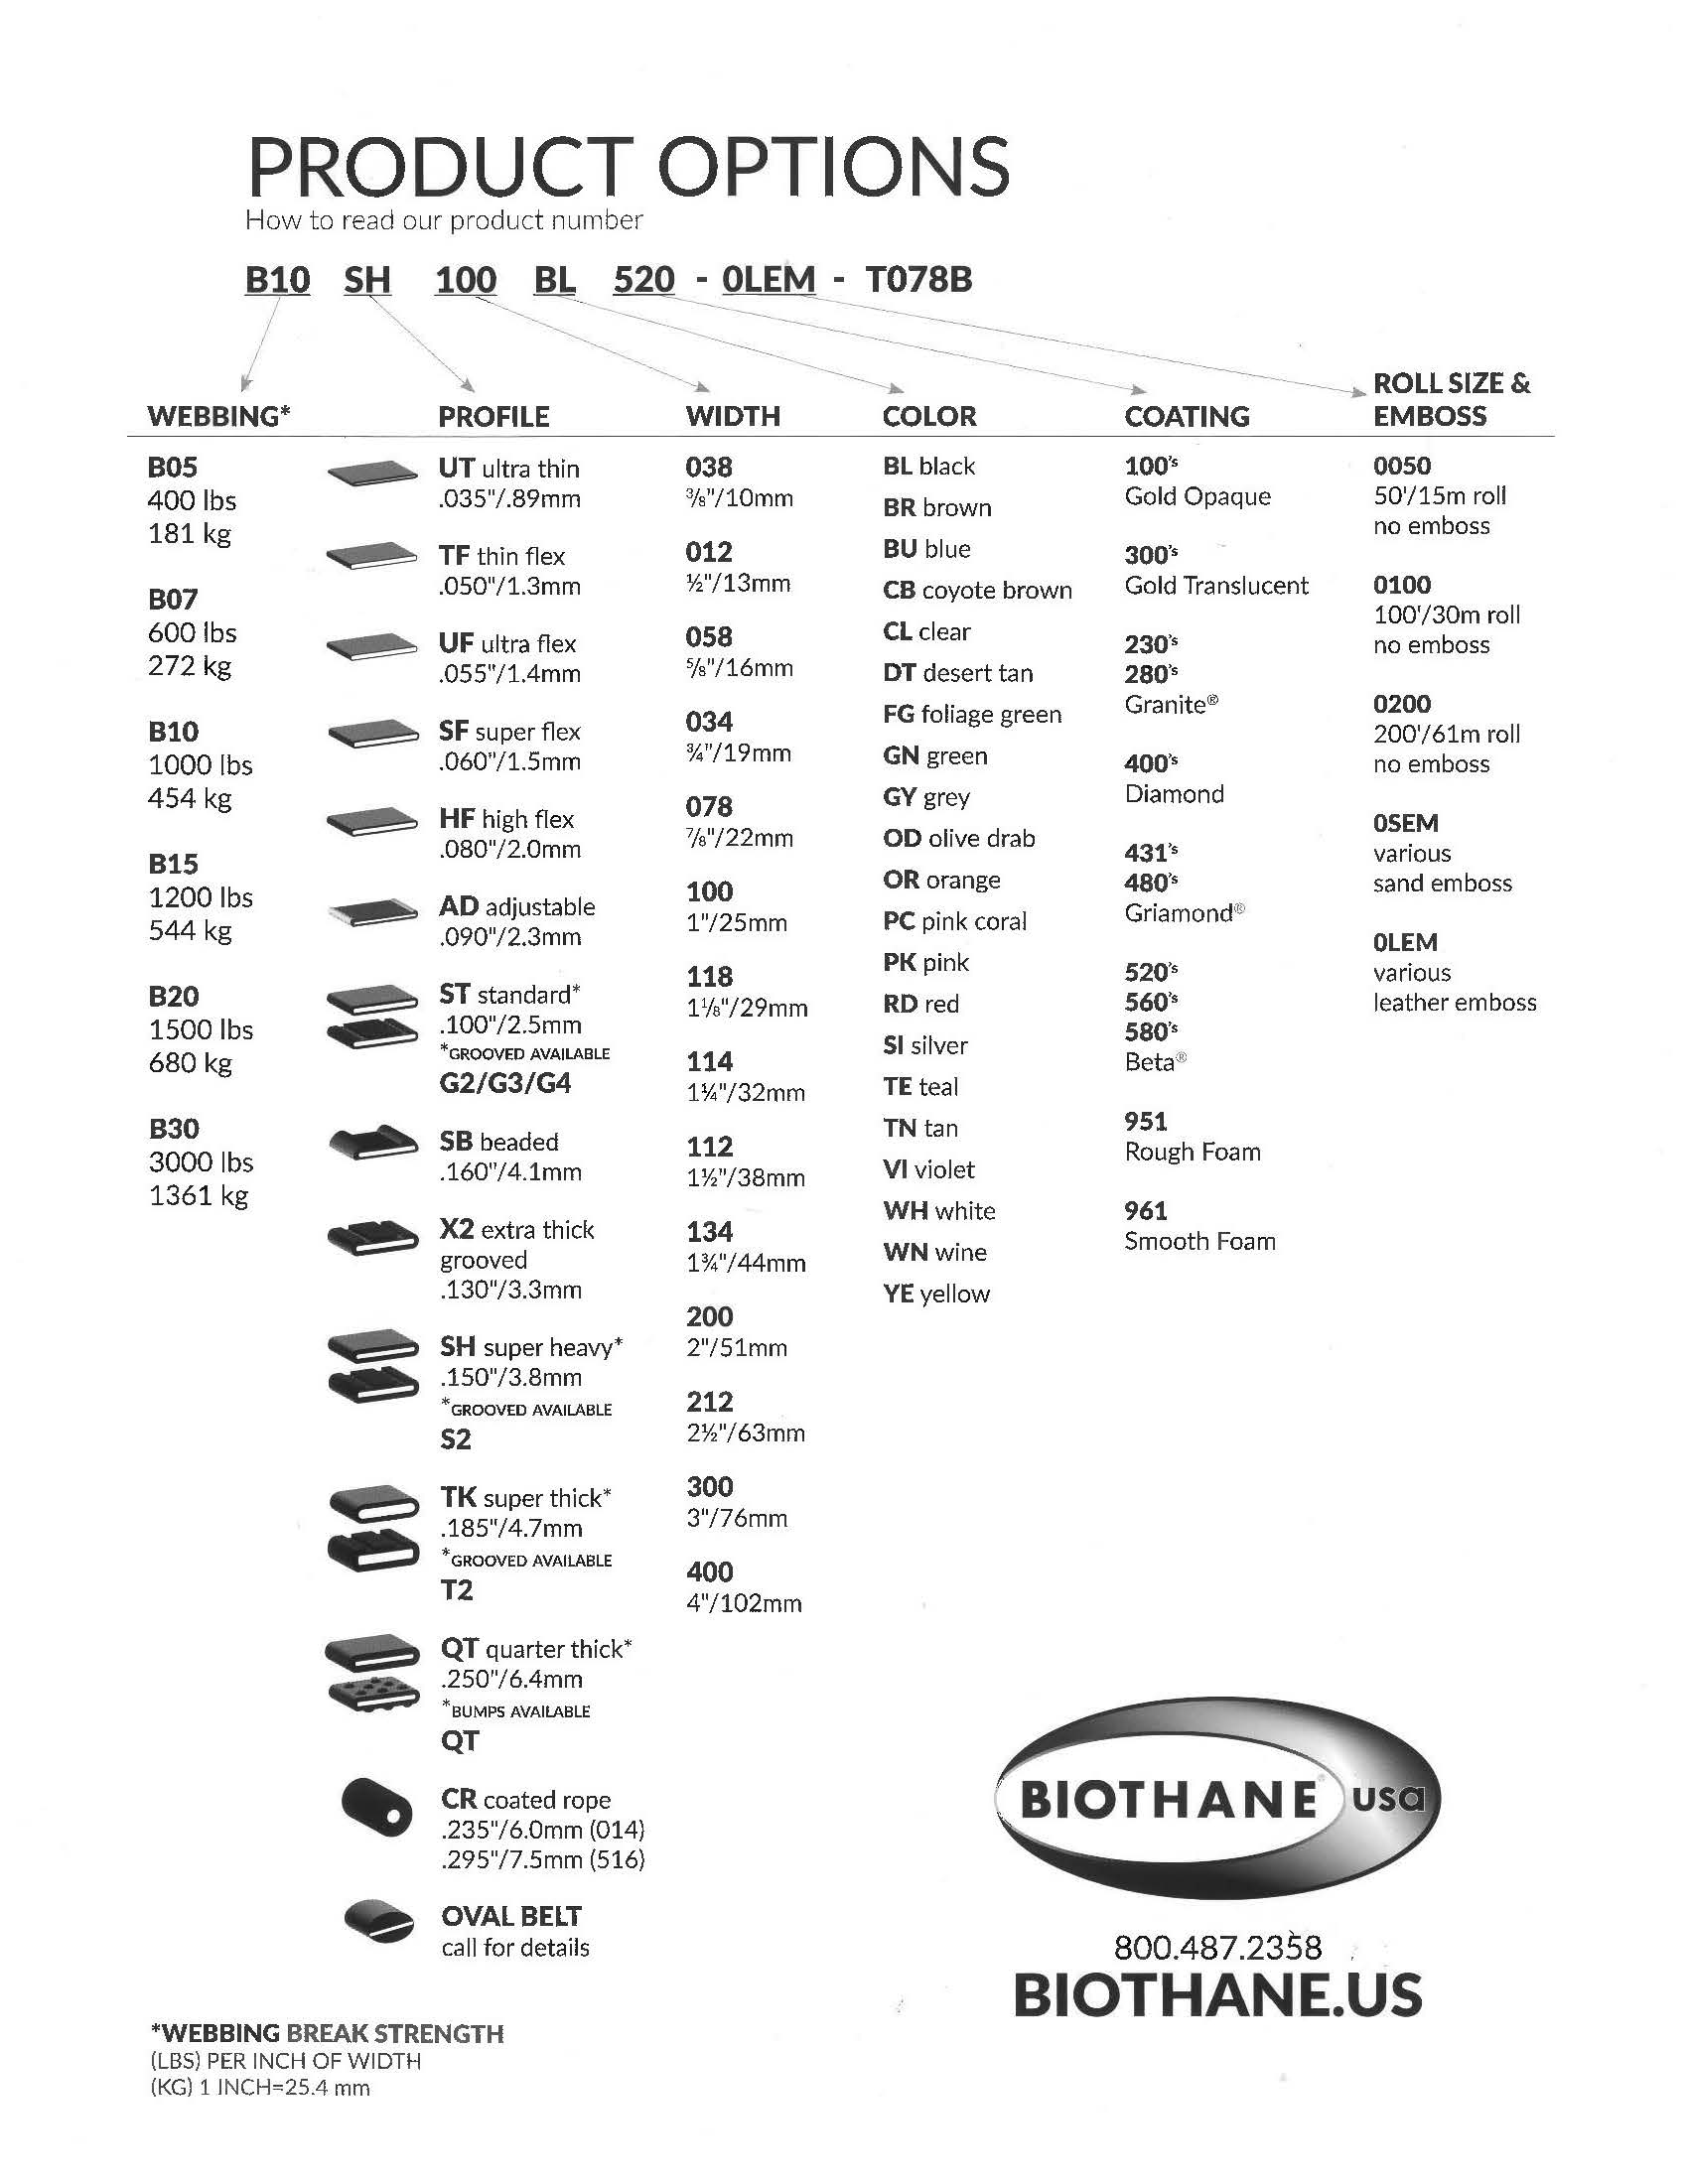 Biothane product number chart showing product code breakdown